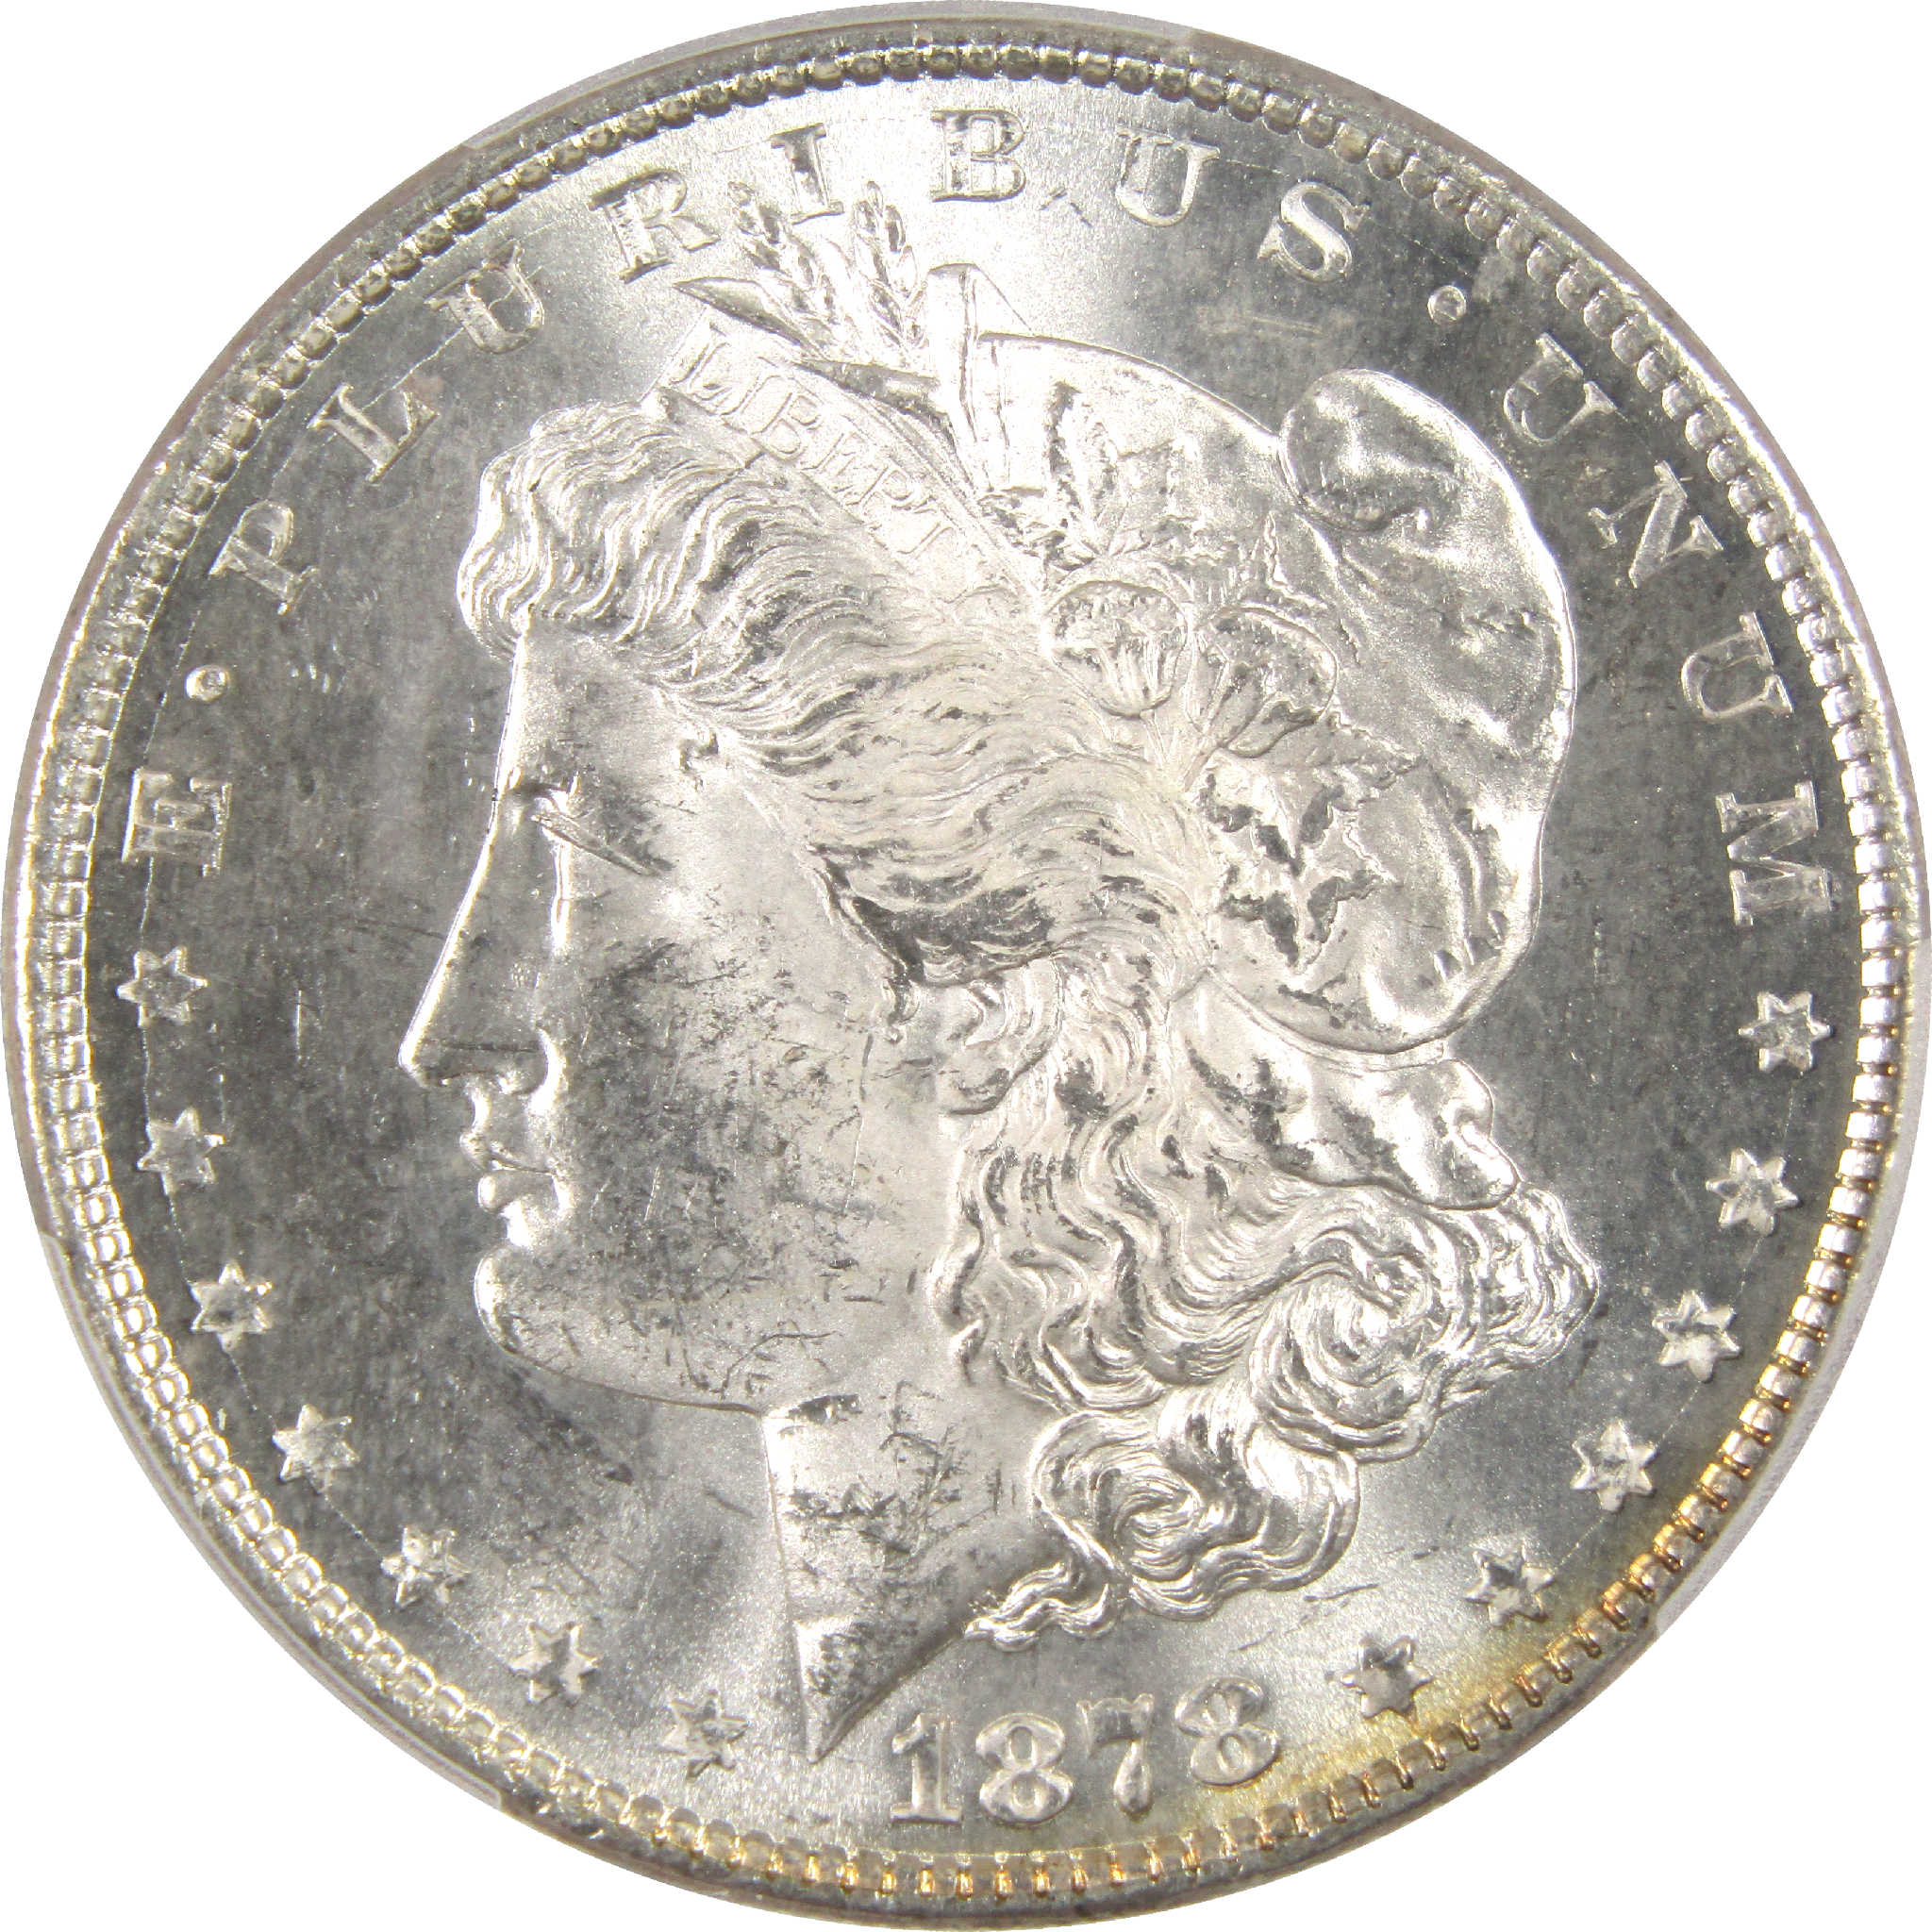 1878 8TF Morgan Dollar MS 62 PCGS Silver $1 Uncirculated SKU:I11338 - Morgan coin - Morgan silver dollar - Morgan silver dollar for sale - Profile Coins &amp; Collectibles